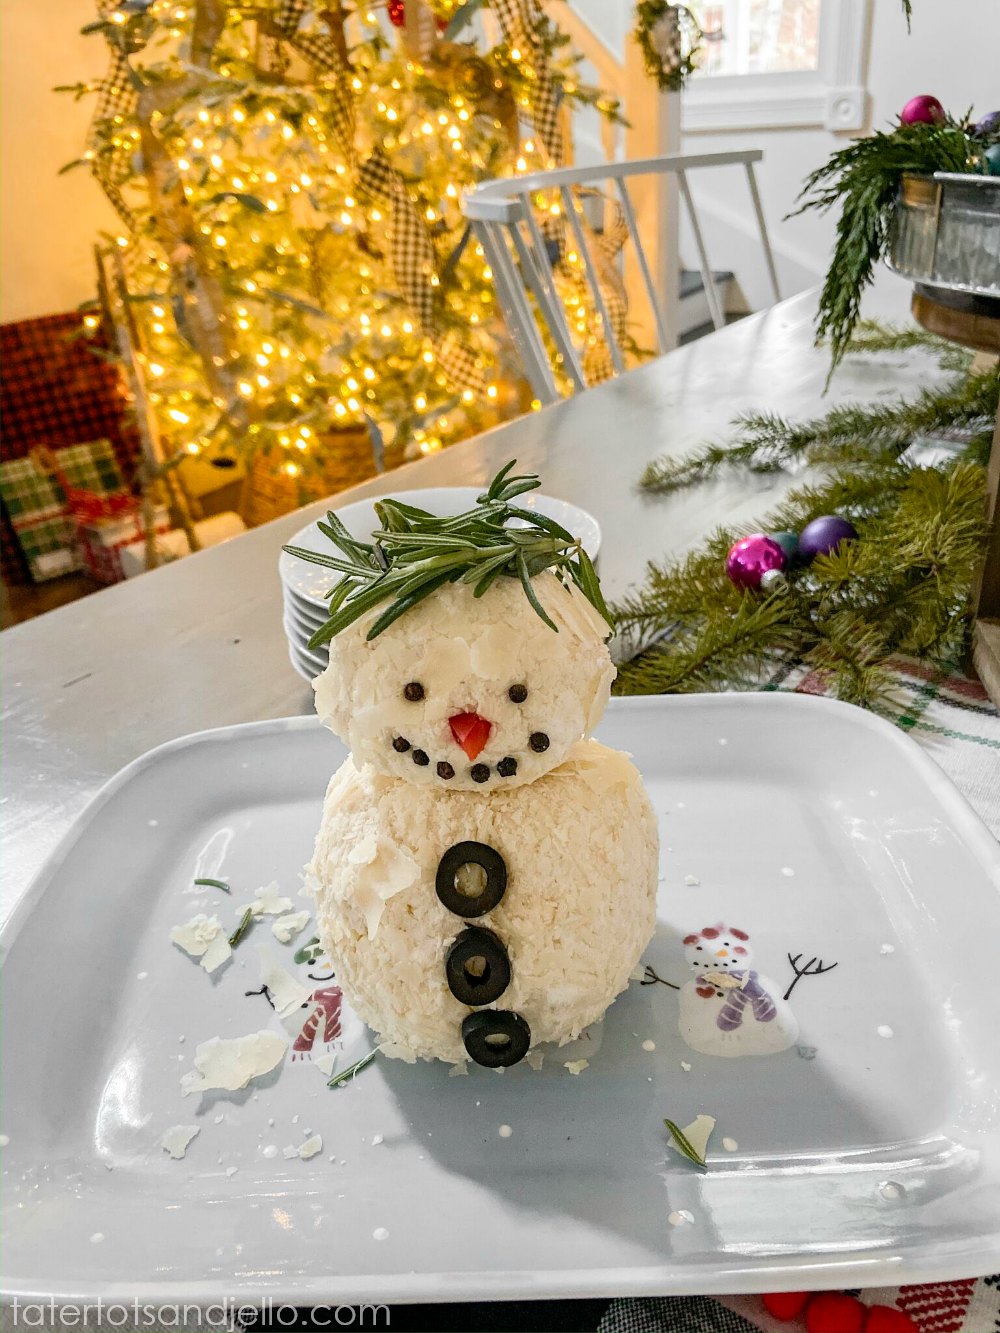 15-Minute Snowman White Cheese Ball Recipe. Mozzarella, cream cheese, Worchesterchire sauce and spices rolled in shaved Parmesan cheese. Divide the cheese ball into two parts and make it into a delightful snowman that will be the hit of any holiday or Winter party! 